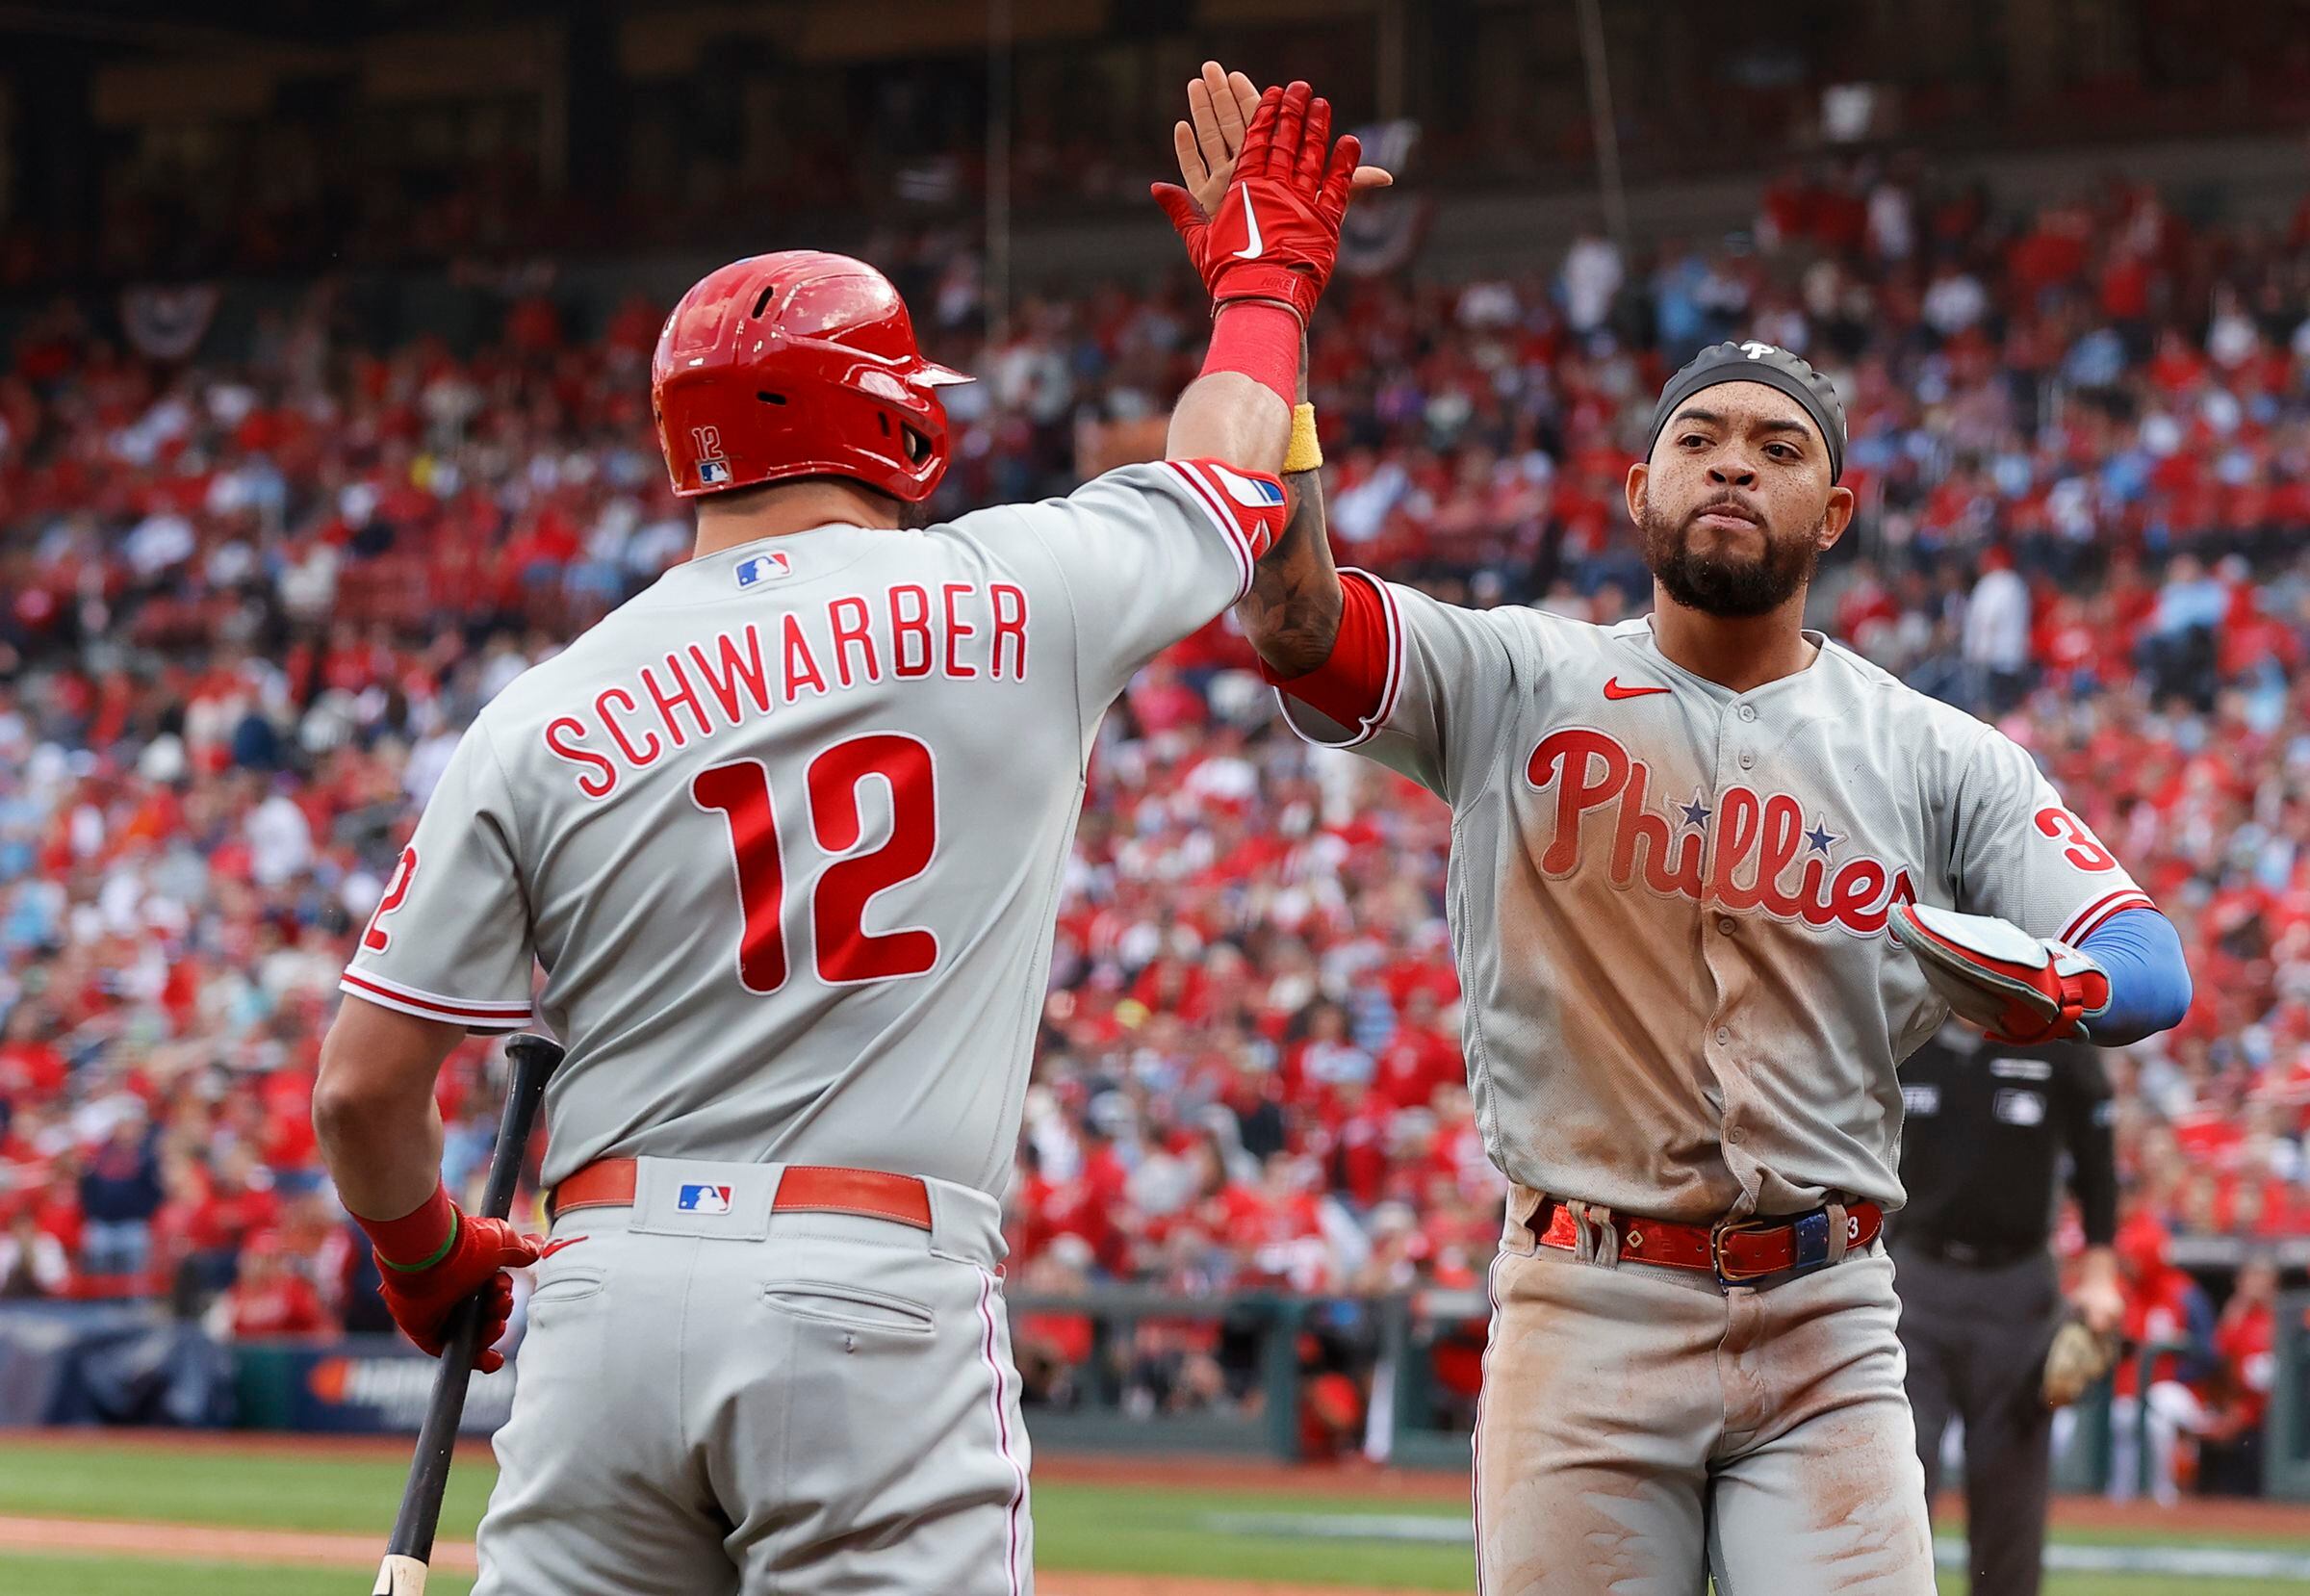 Phillies 2B Jean Segura leaves game after being hit in face by